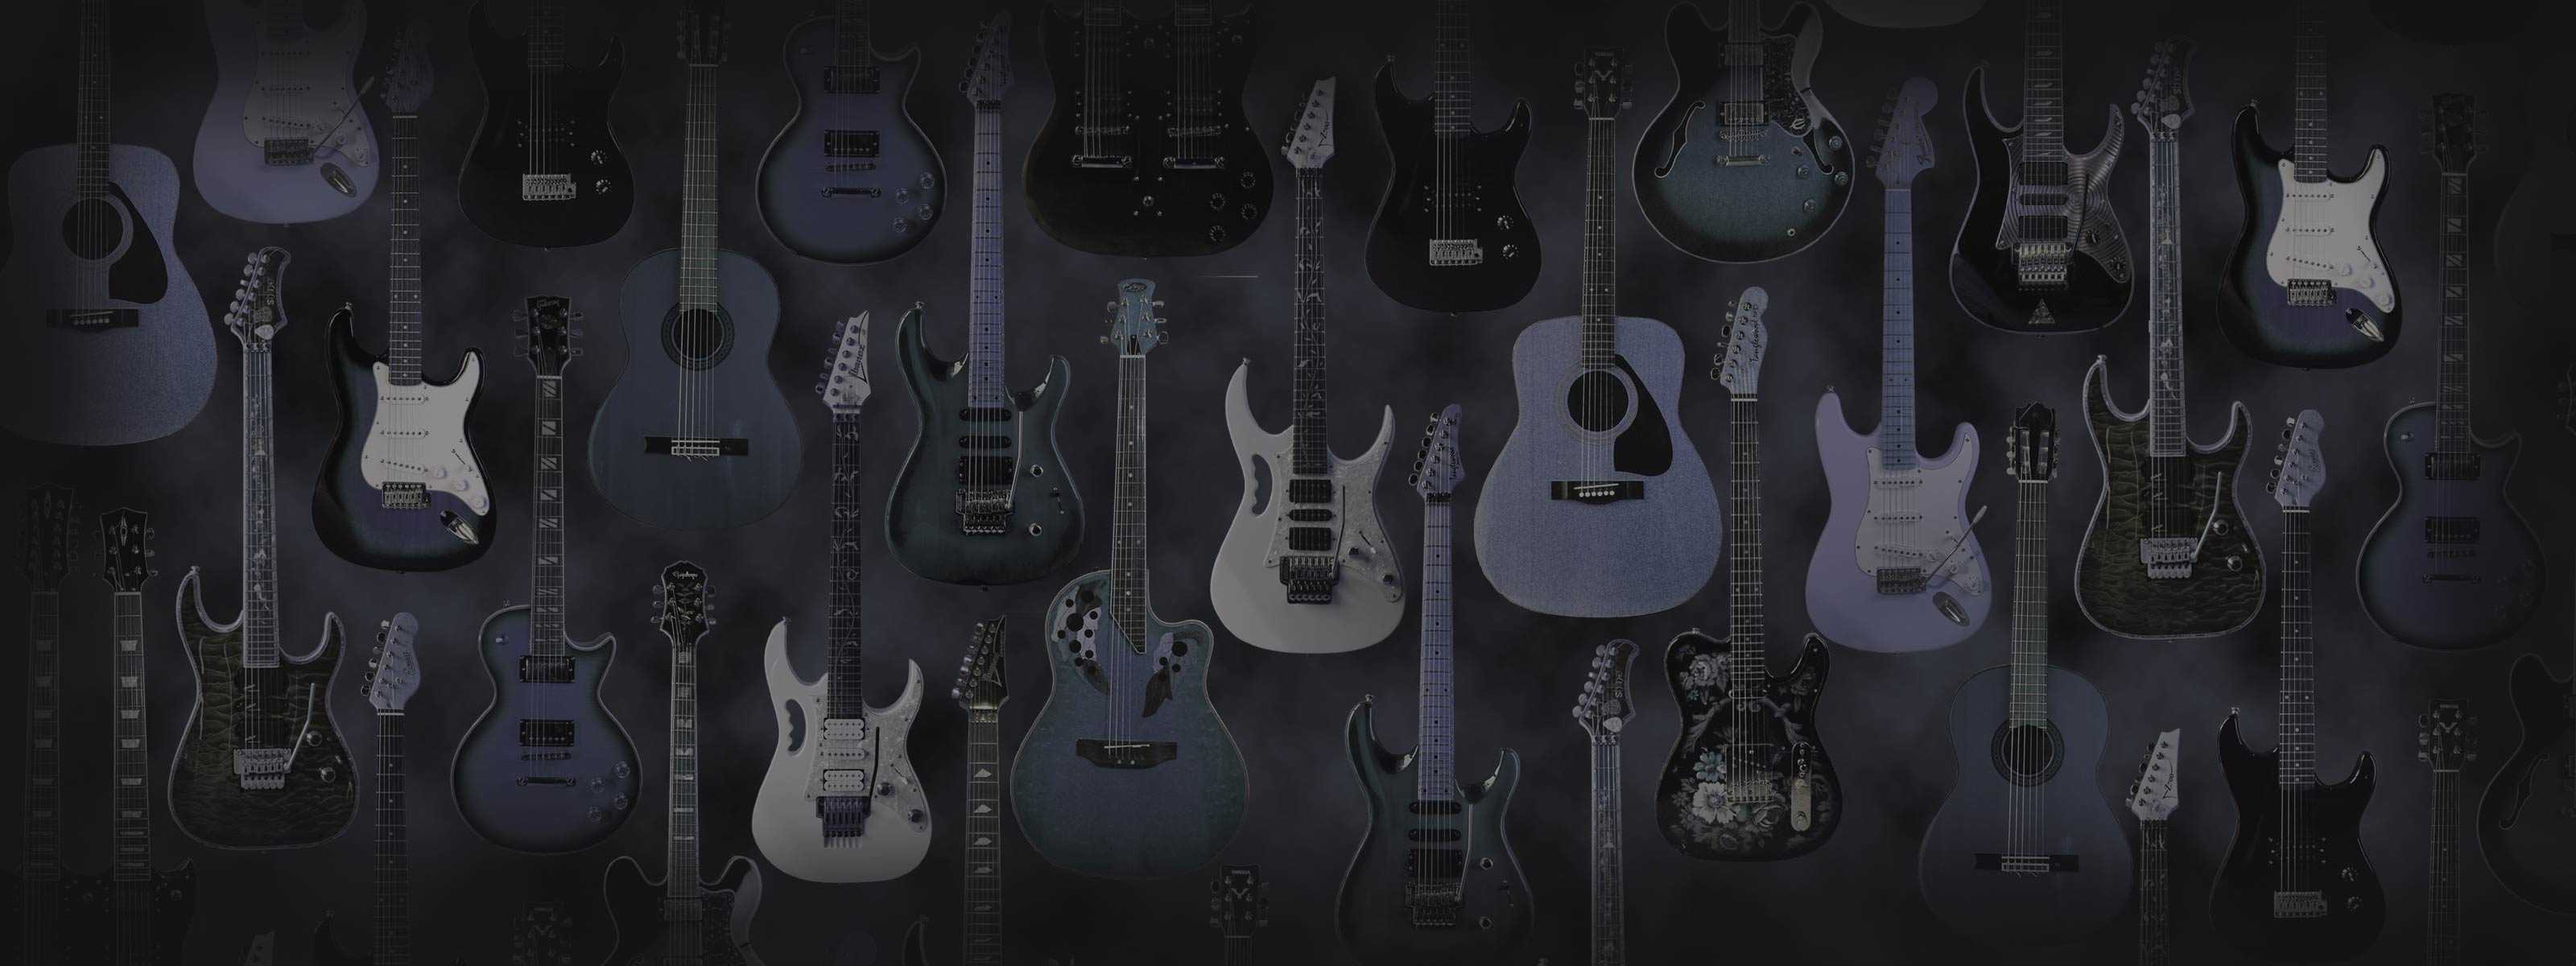 Dual Monitor Guitar Wallpaper From Gch Academy